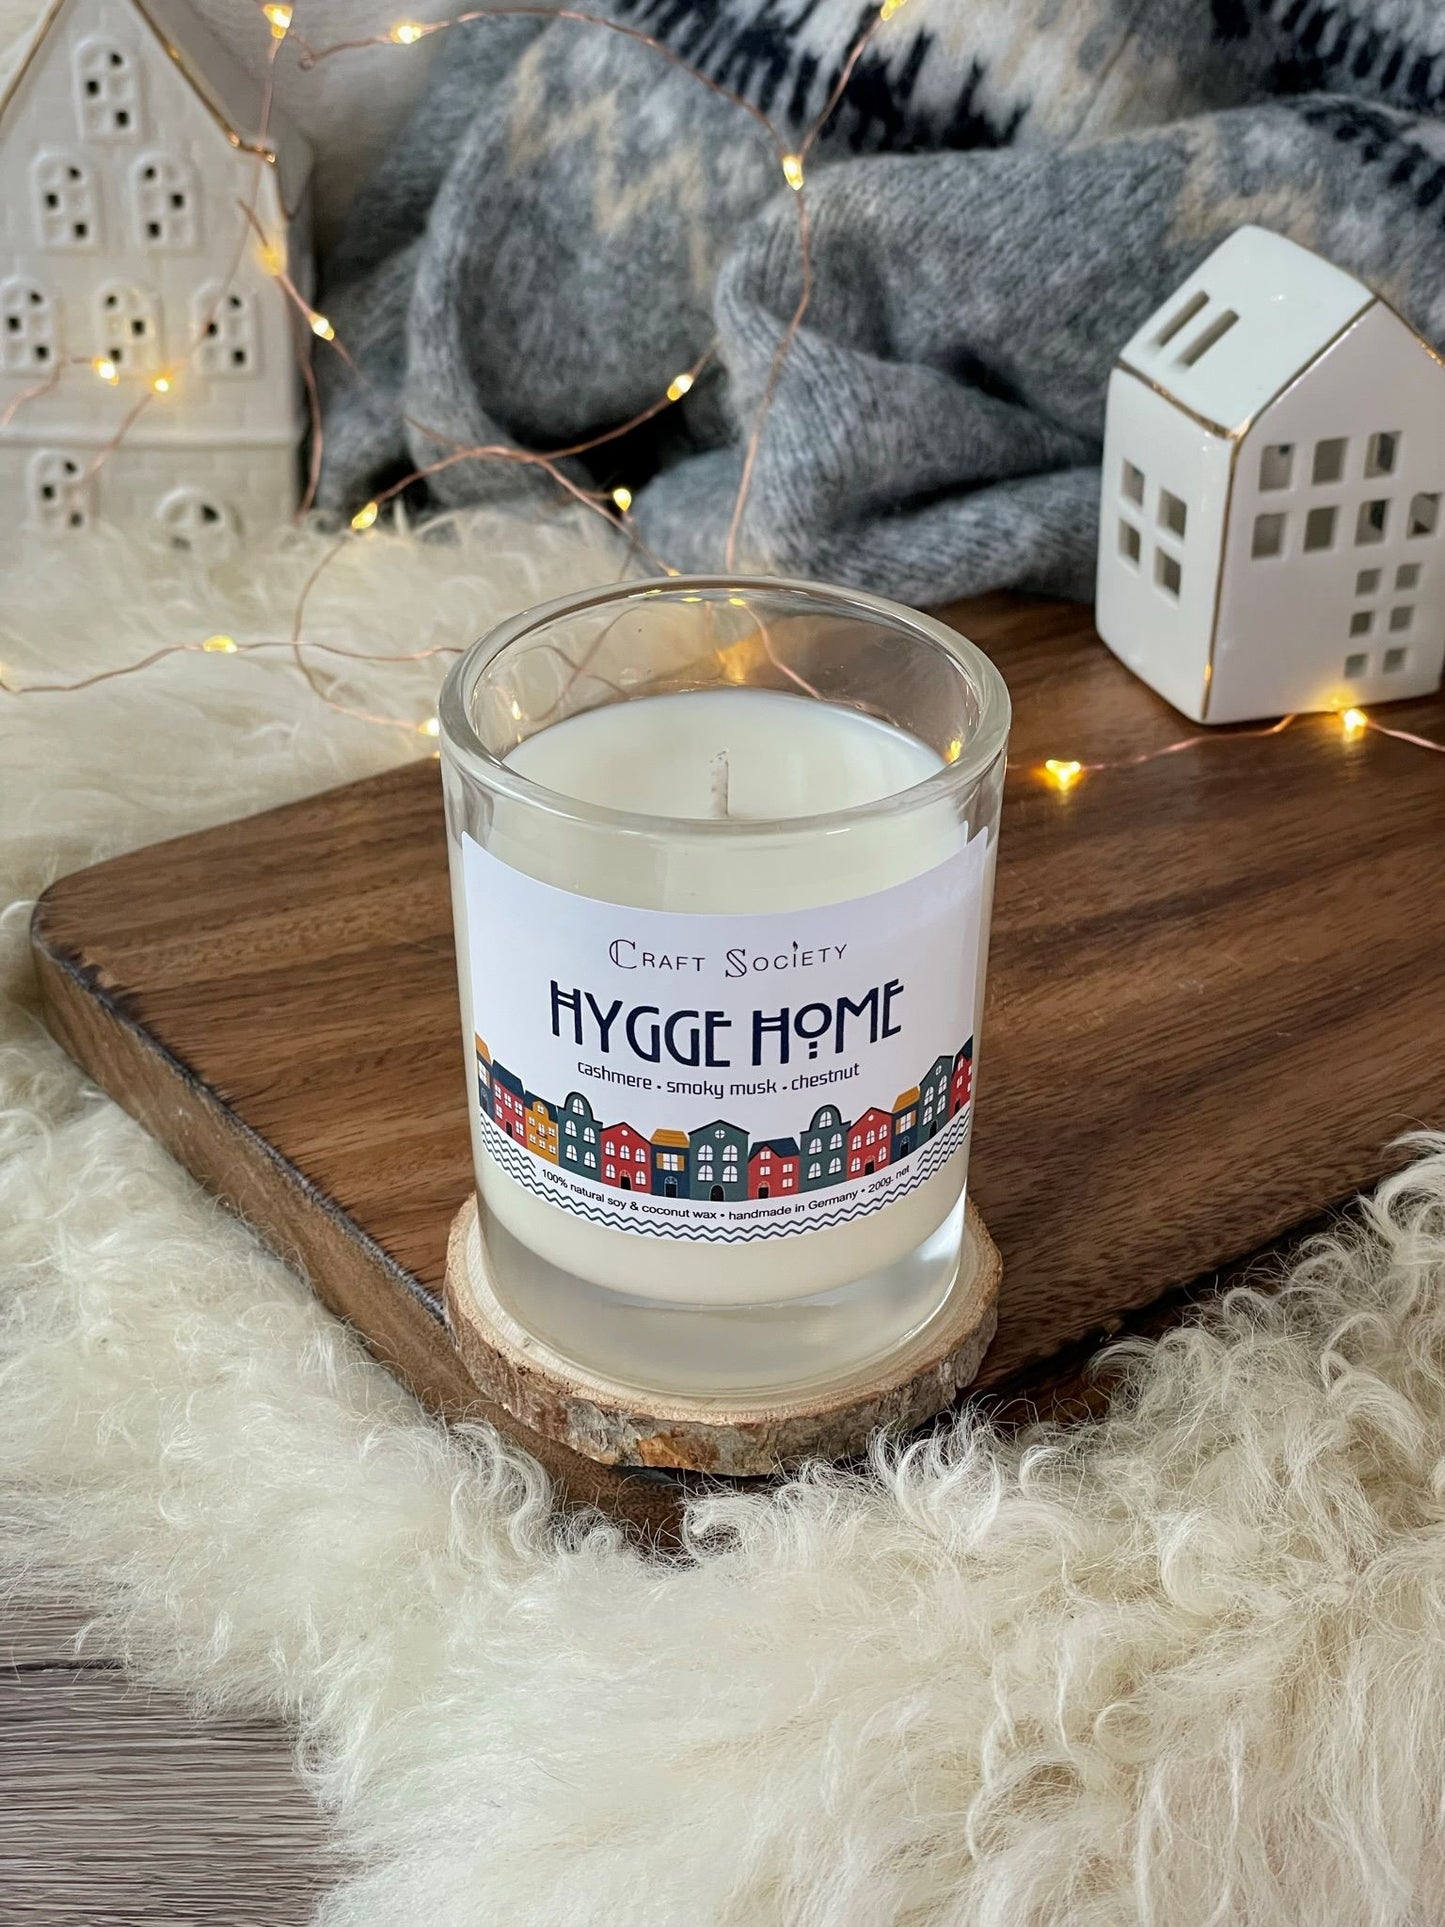 A scented candle made from vegetable wax with cotton wick